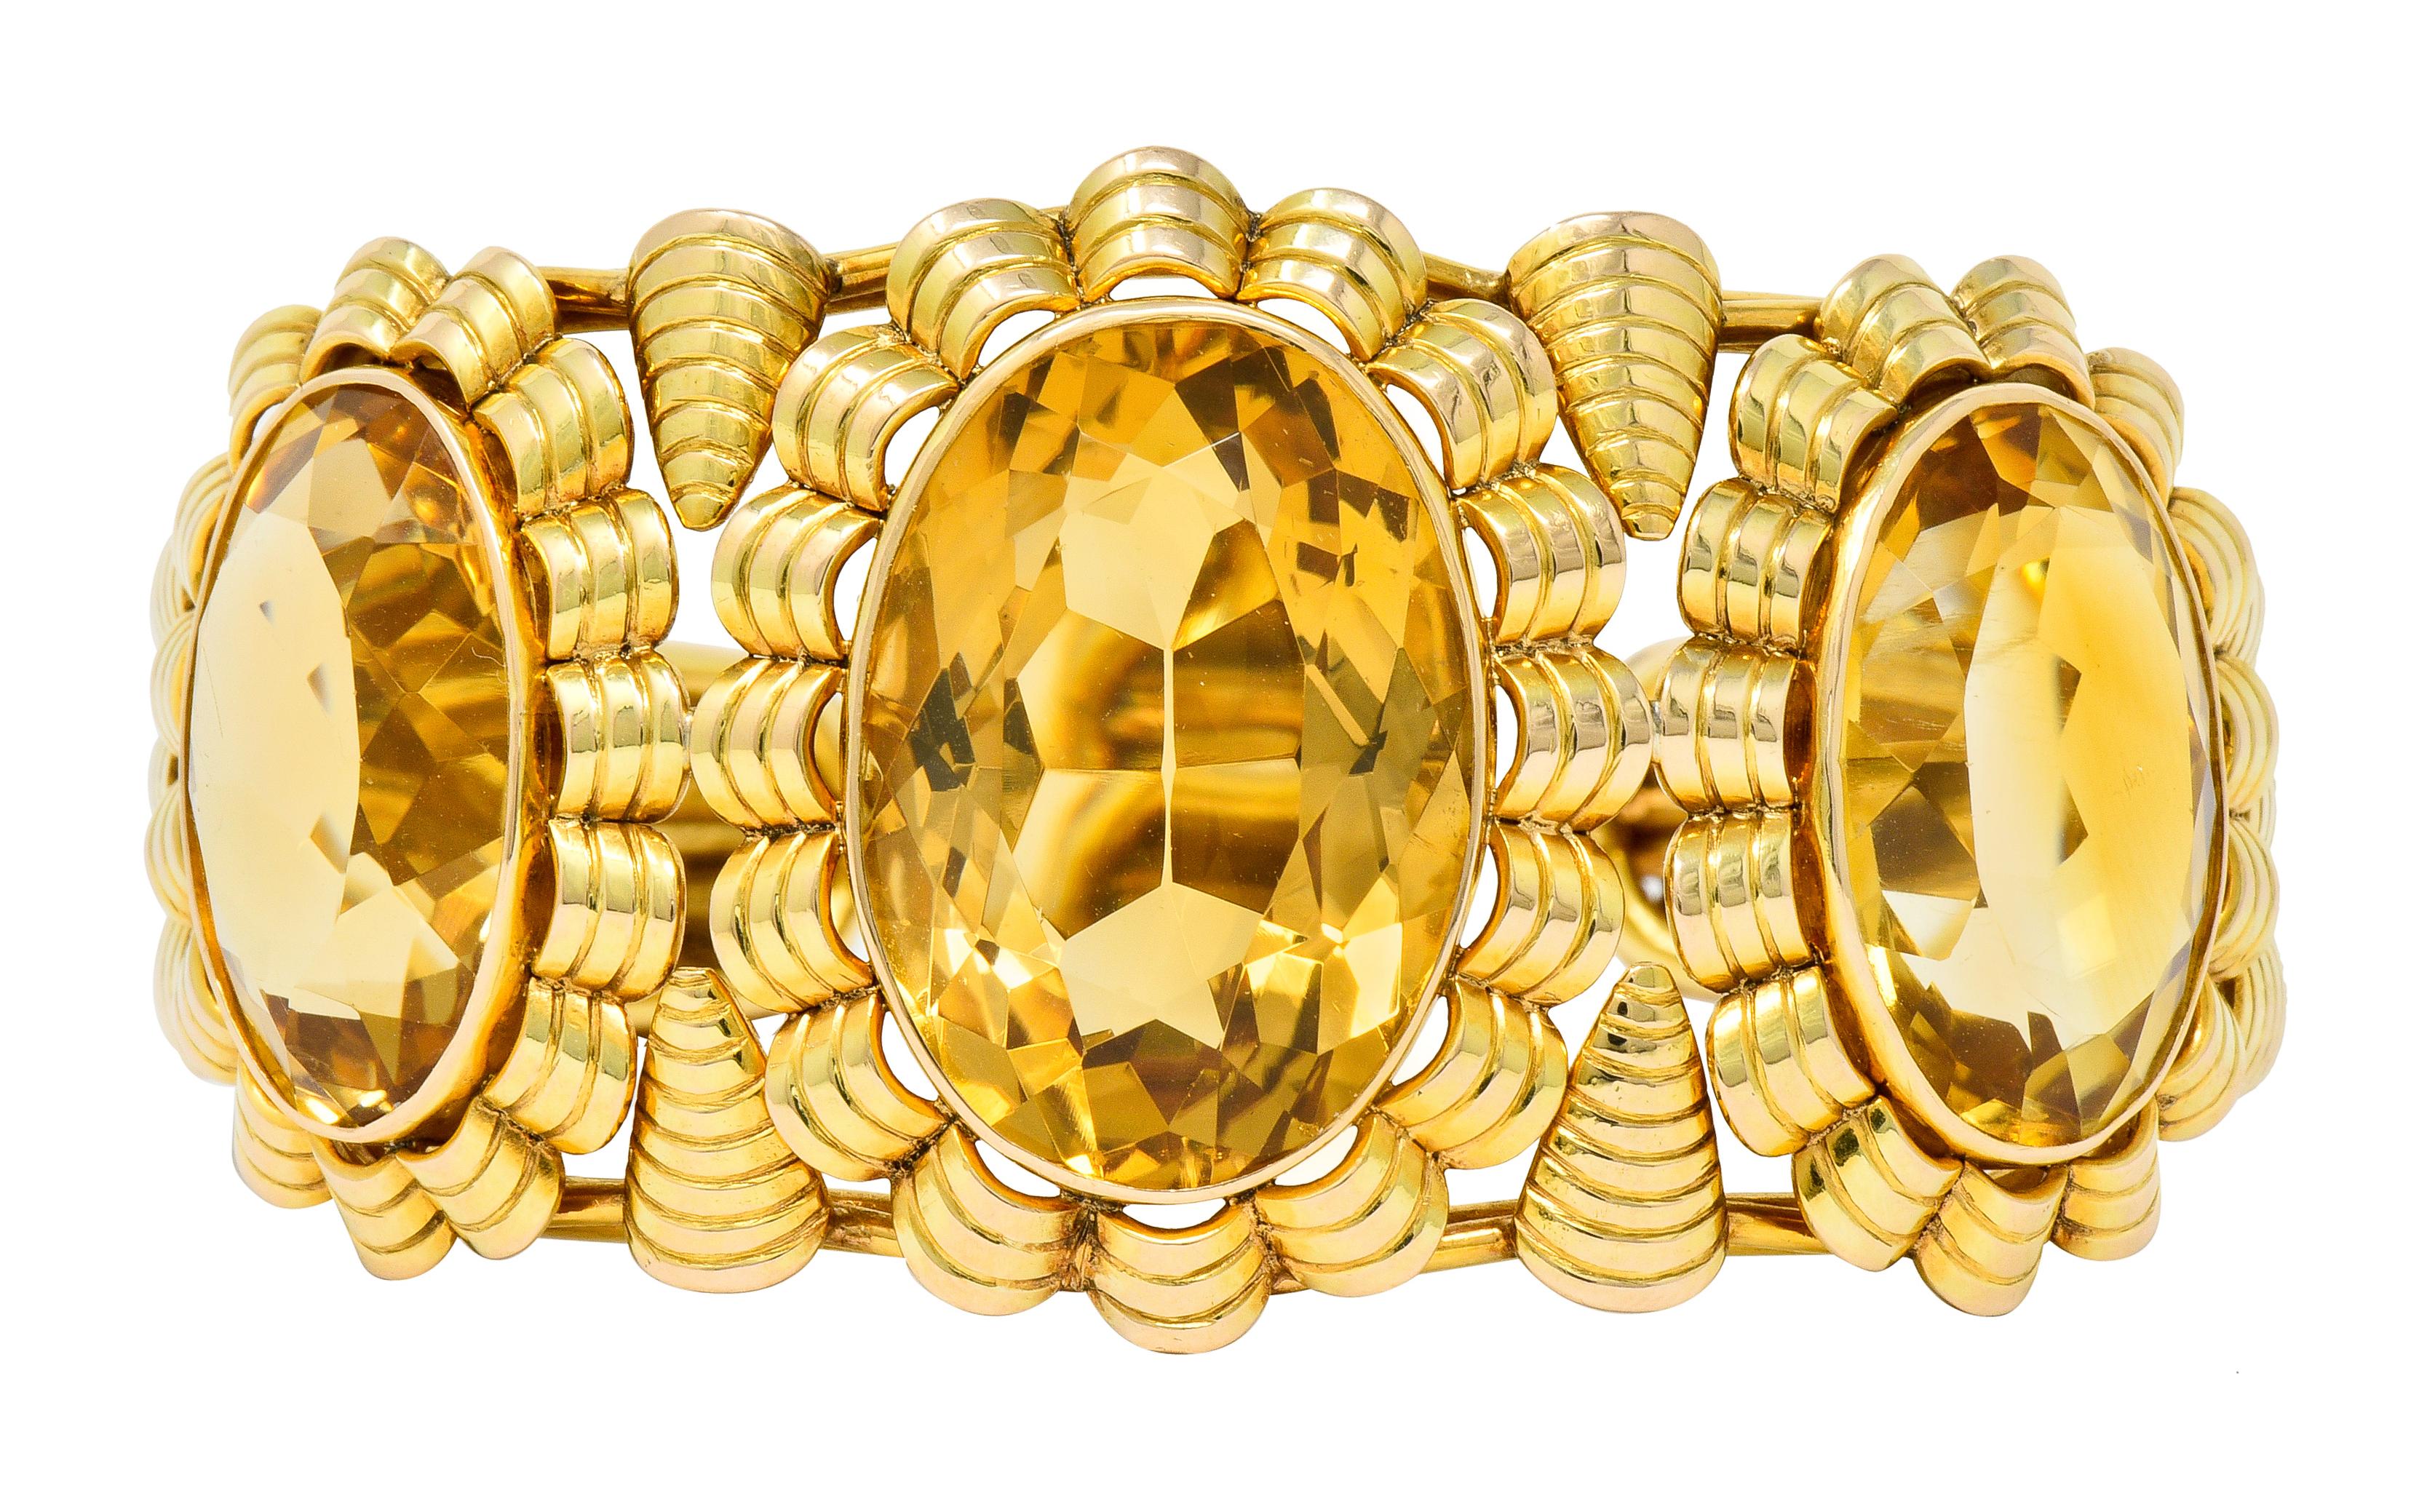 Cuff style bracelet features three oval cut citrine, each bezel set to front as a floral motif with scalloped petal surrounds and a ribbed texture

Citrine weighs in total approximately 56.95 carats and is transparent with a very well-matched light